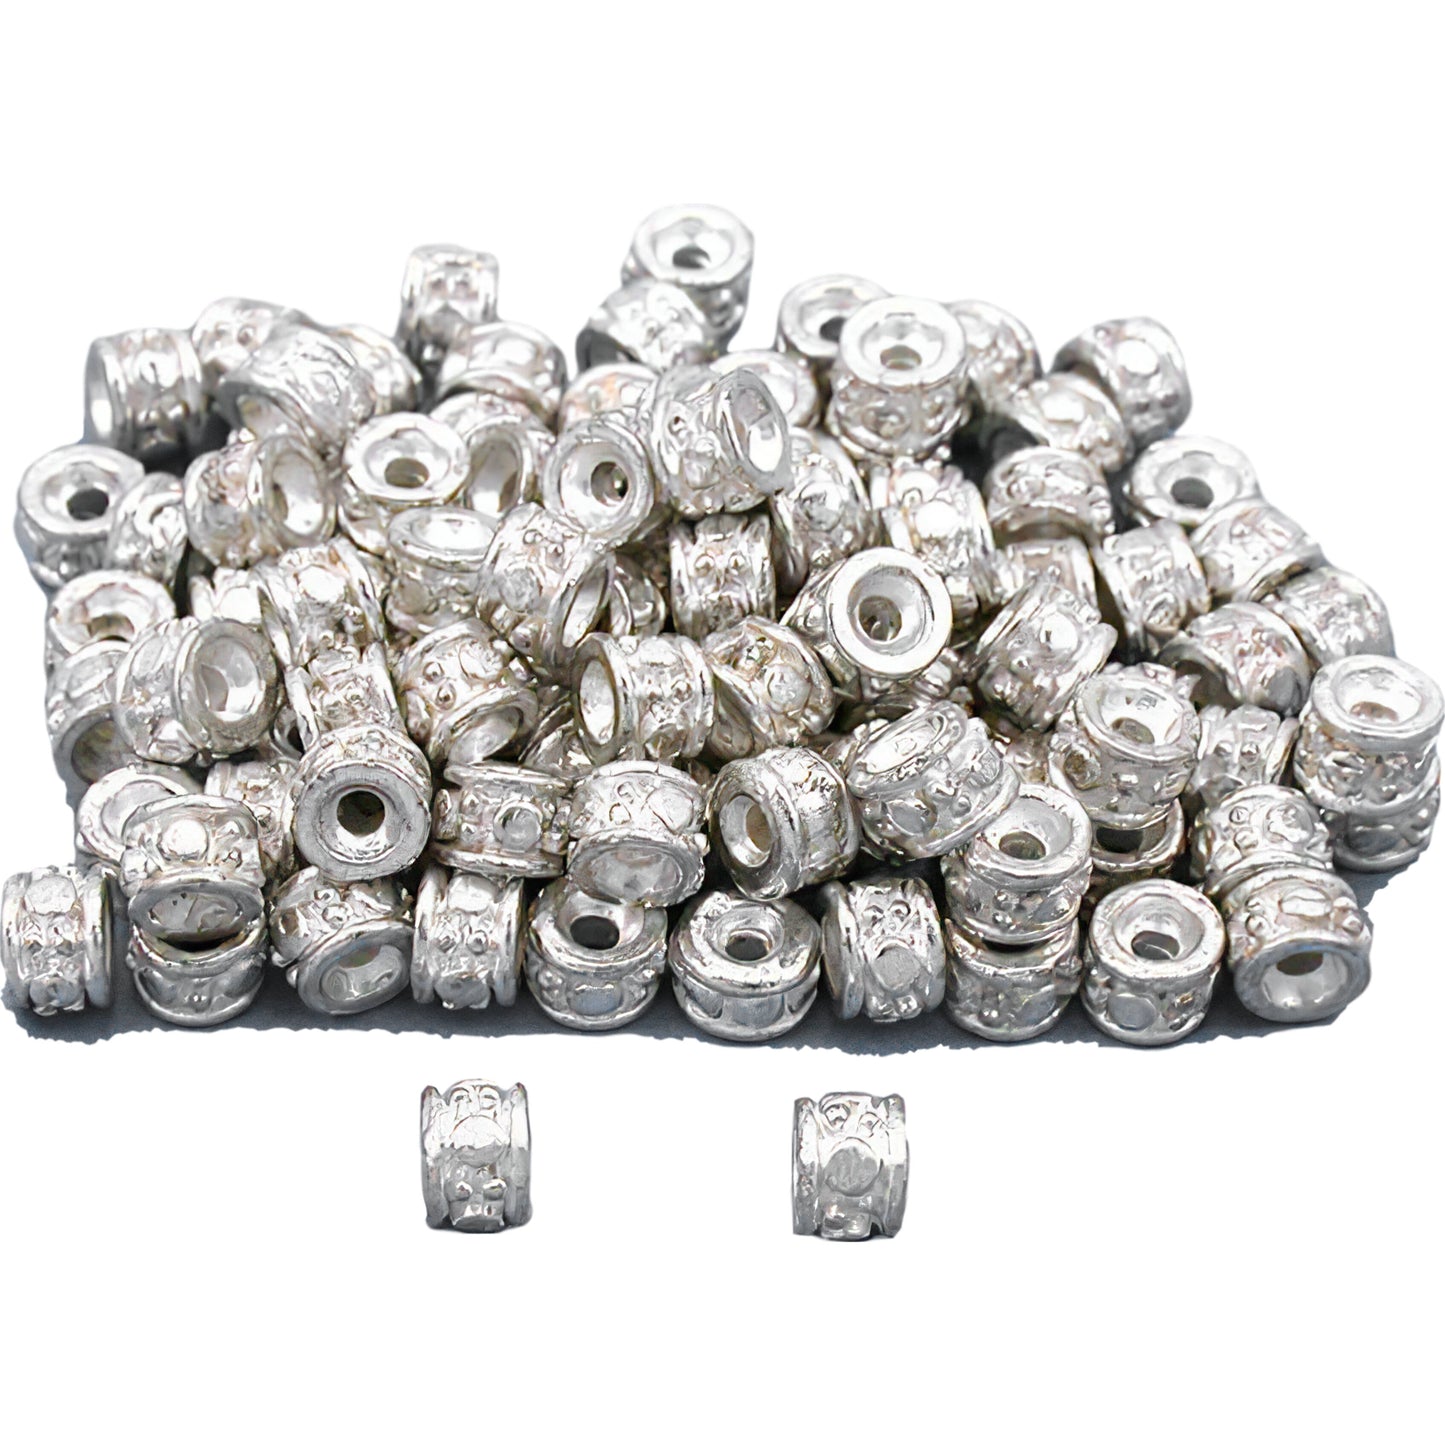 Spacer Bali Beads Silver Plated Parts 5.5mm Approx 100